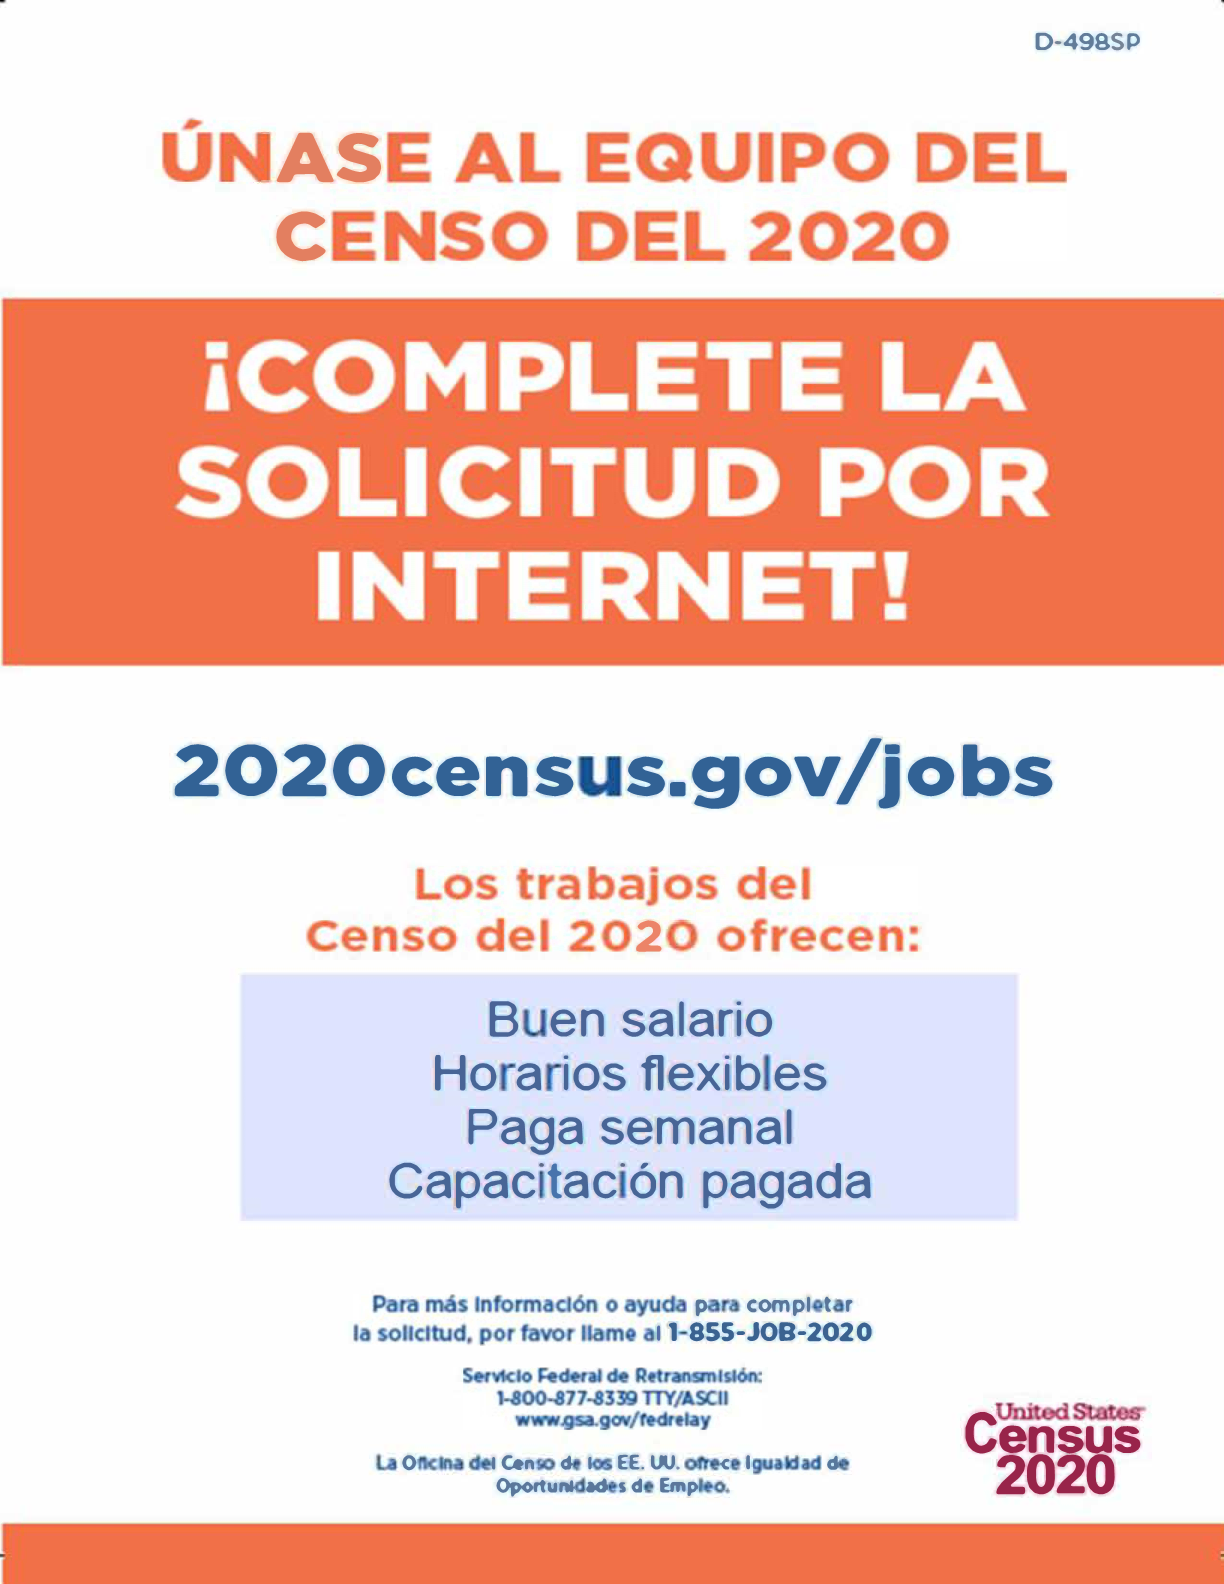 Census Jobs Poster in Spanish